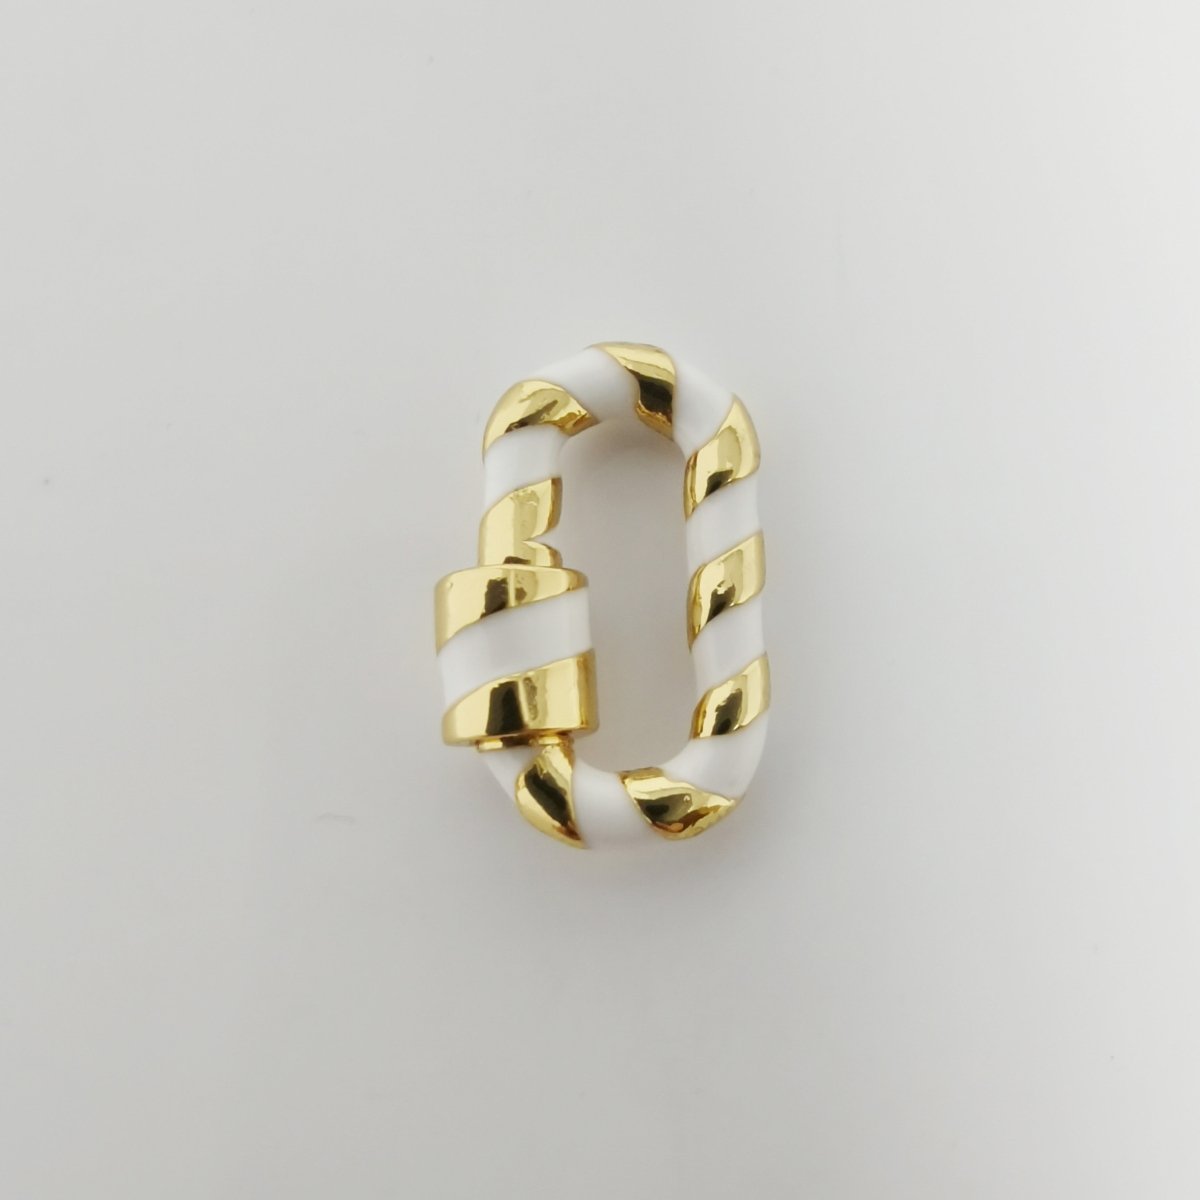 24K Gold-Plated White and Gold Paperclip Carabiner, Candy Cane Swirl Design, Circle Screw Clasp - DLUXCA